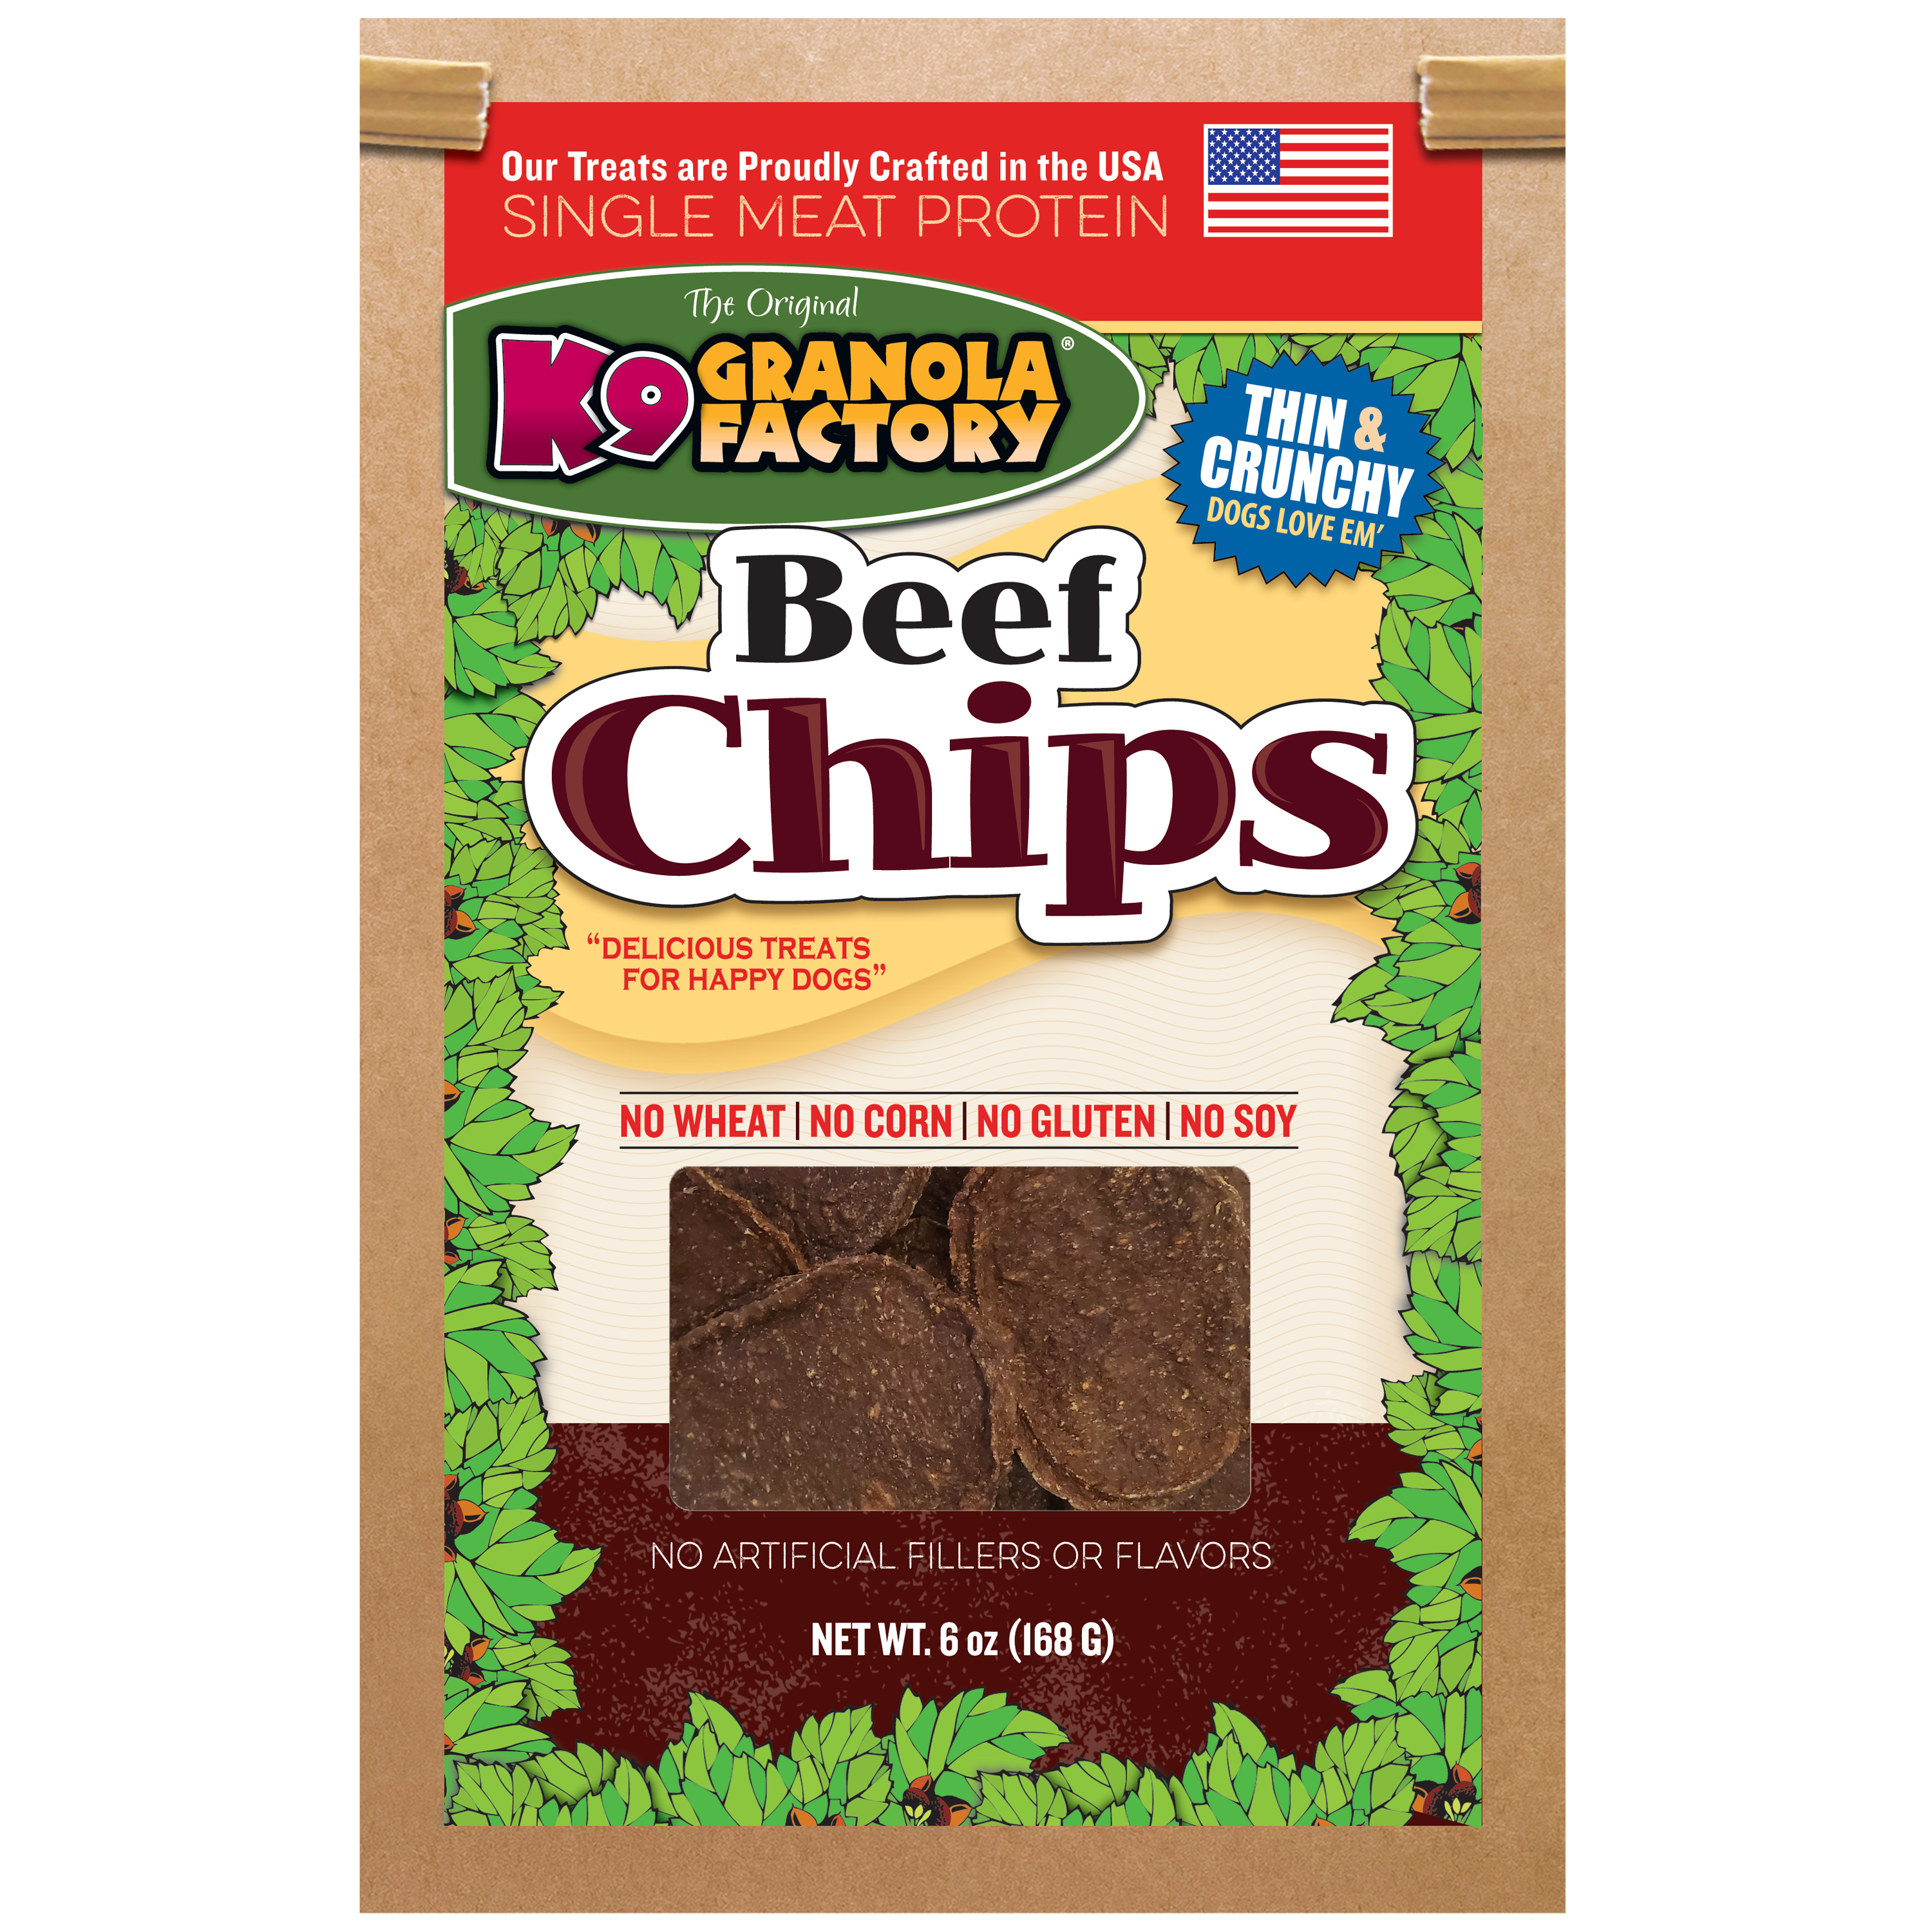 K9 Granola Factory Chip Collection Beef Chips Dog Treats, 6oz